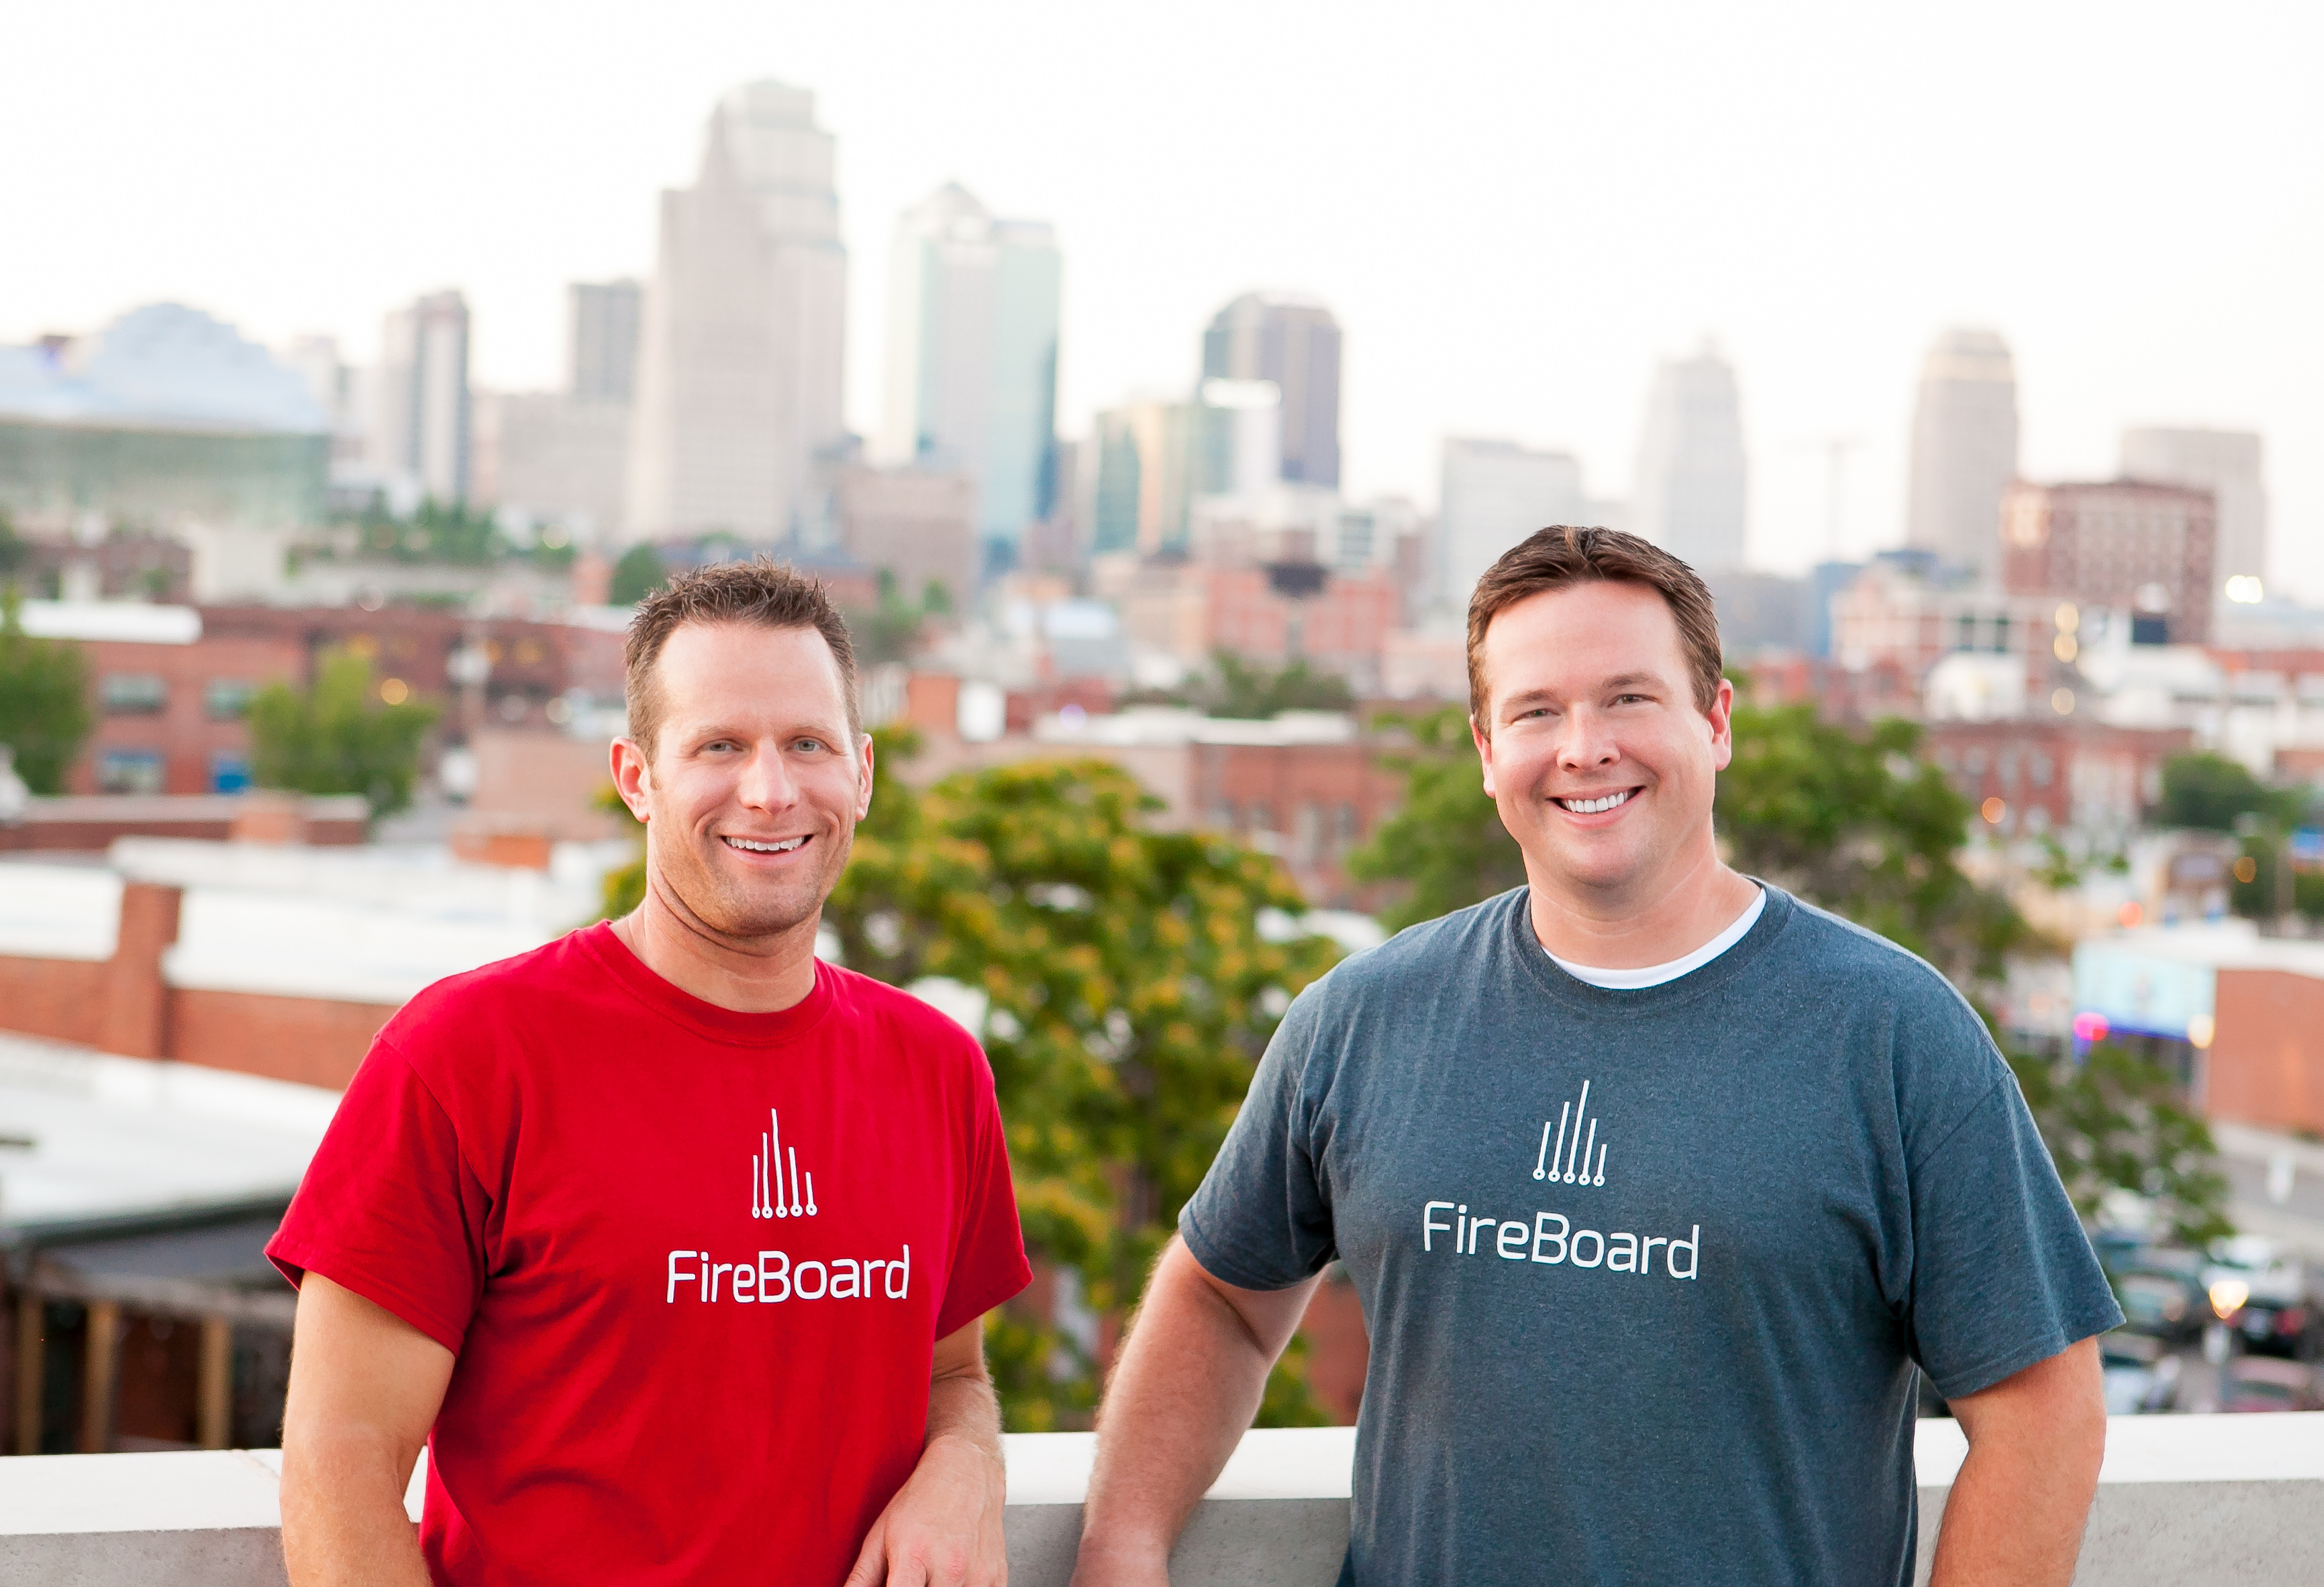 https://fireboard.io/static/images/press/4-founders-002.jpg